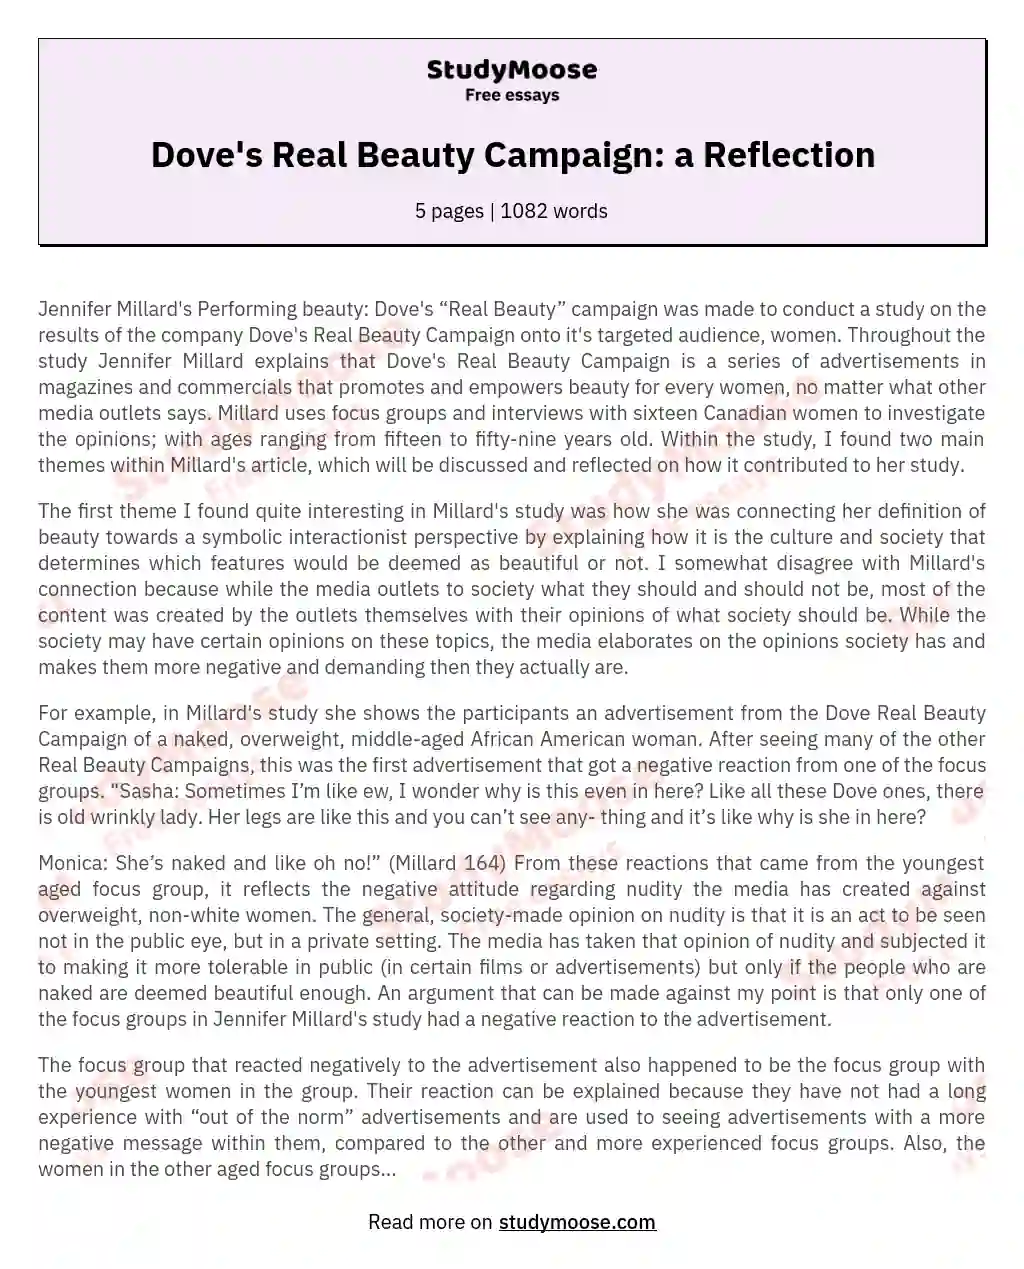 Dove's Real Beauty Campaign: a Reflection